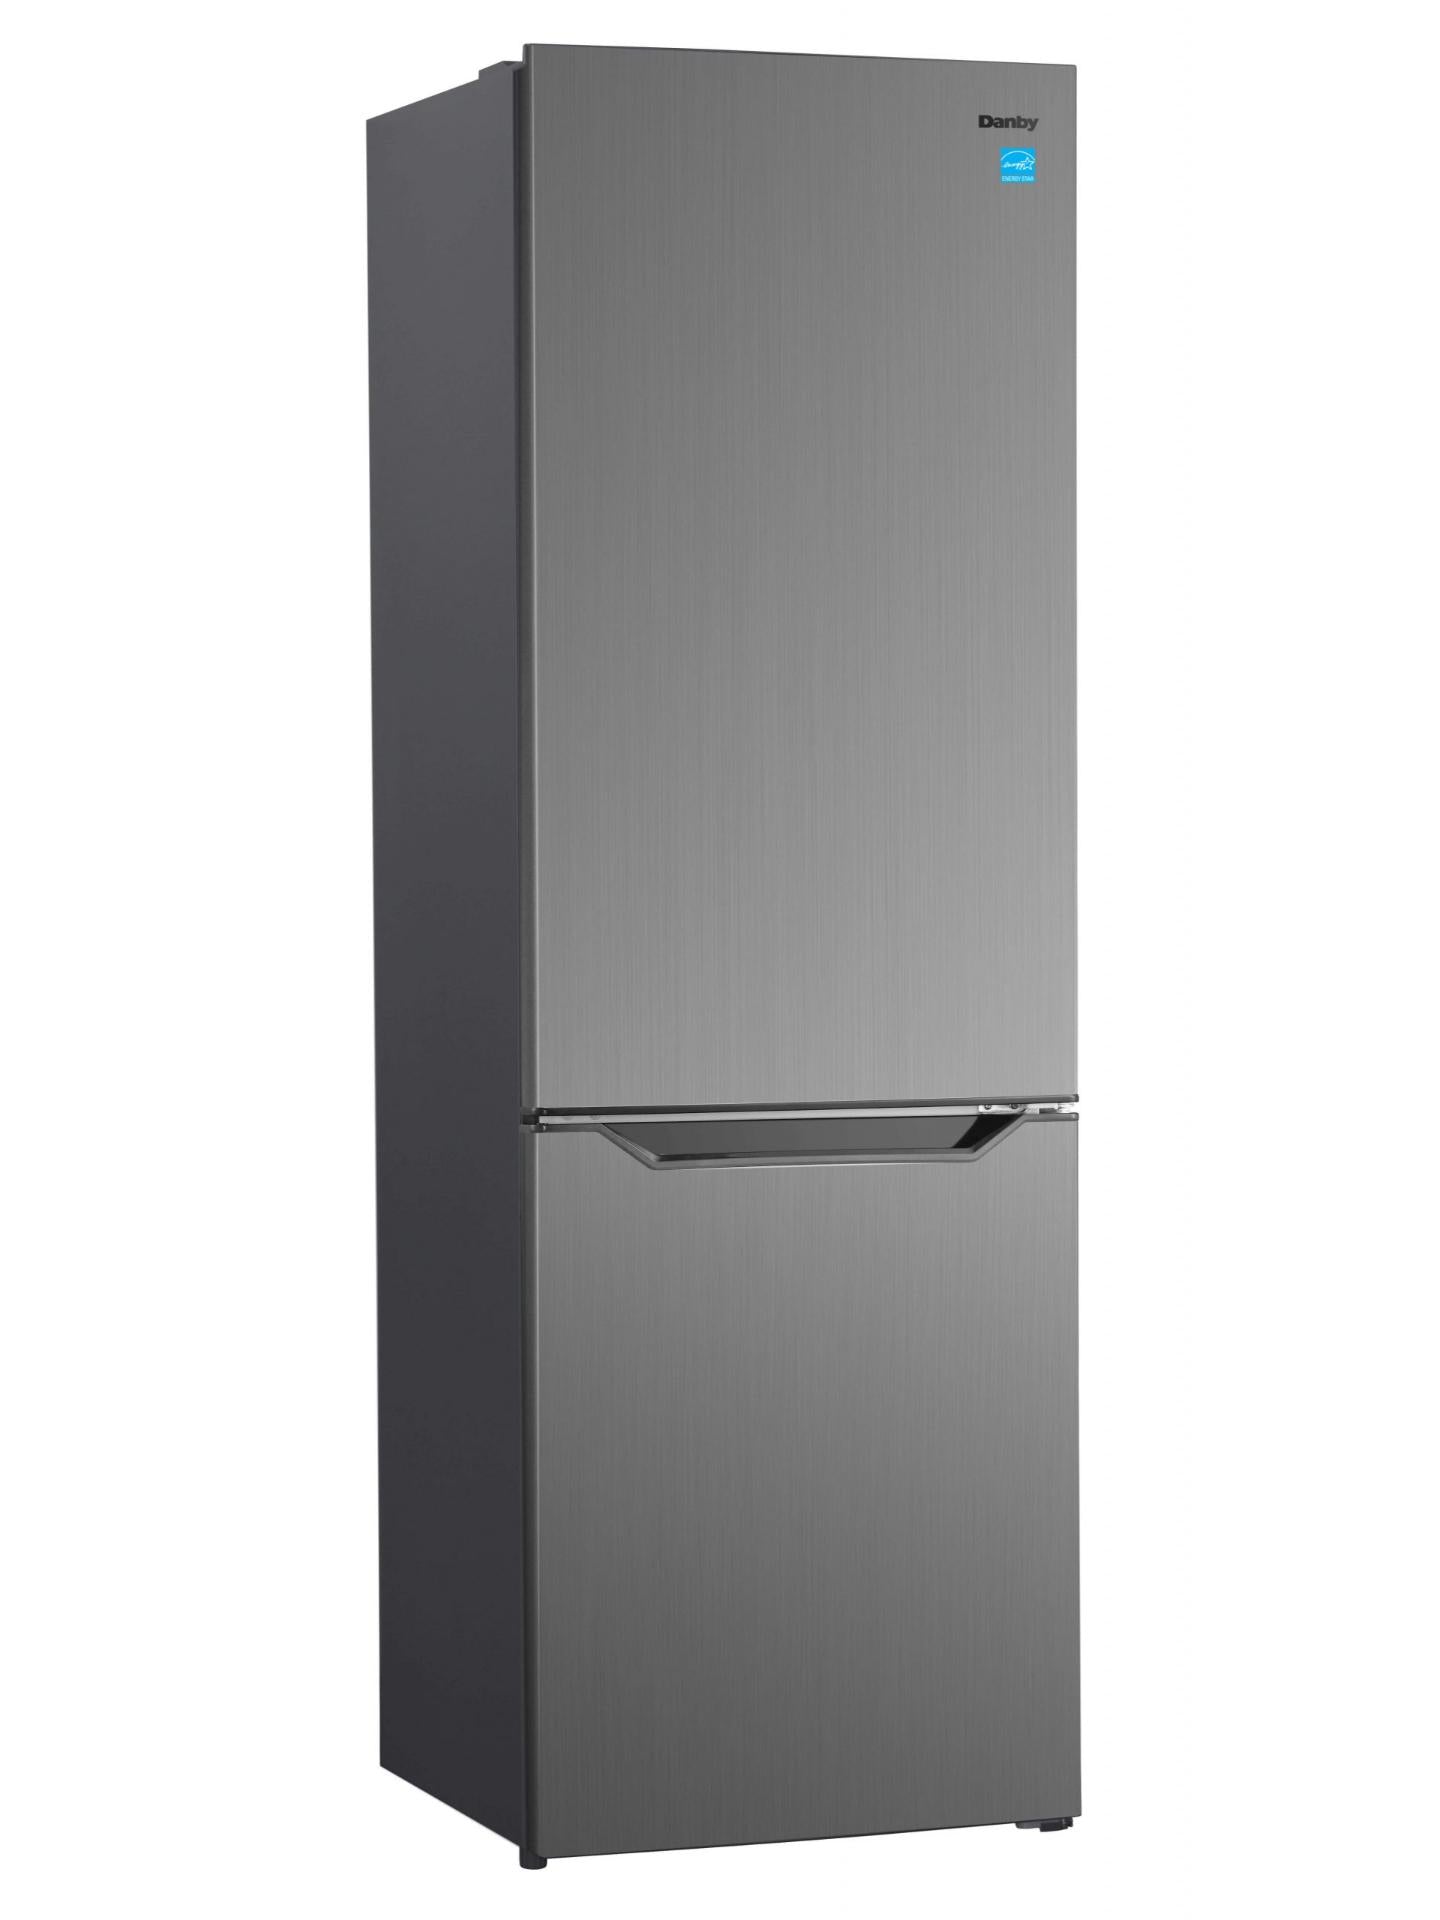 Danby 10.3 cu. ft. Bottom Mount Apartment Size Fridge in Stainless Steel